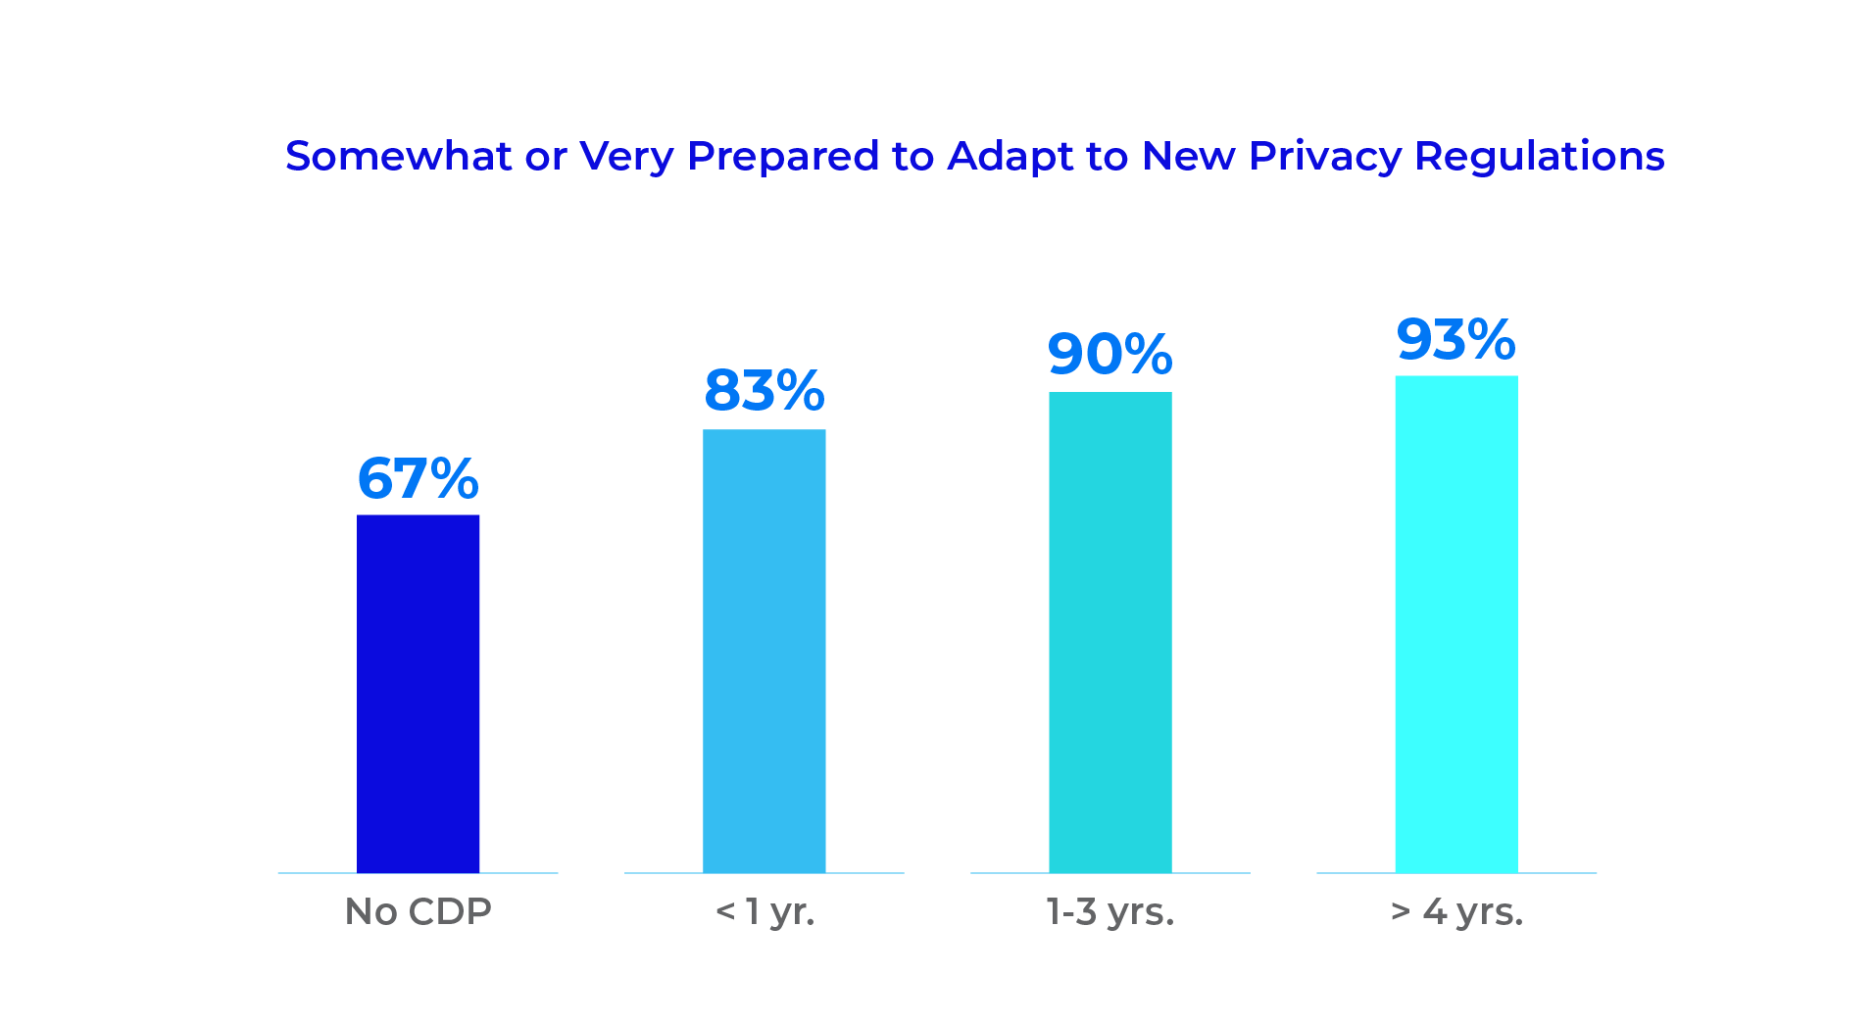 CDPs help companies adapt to new privacy regulations